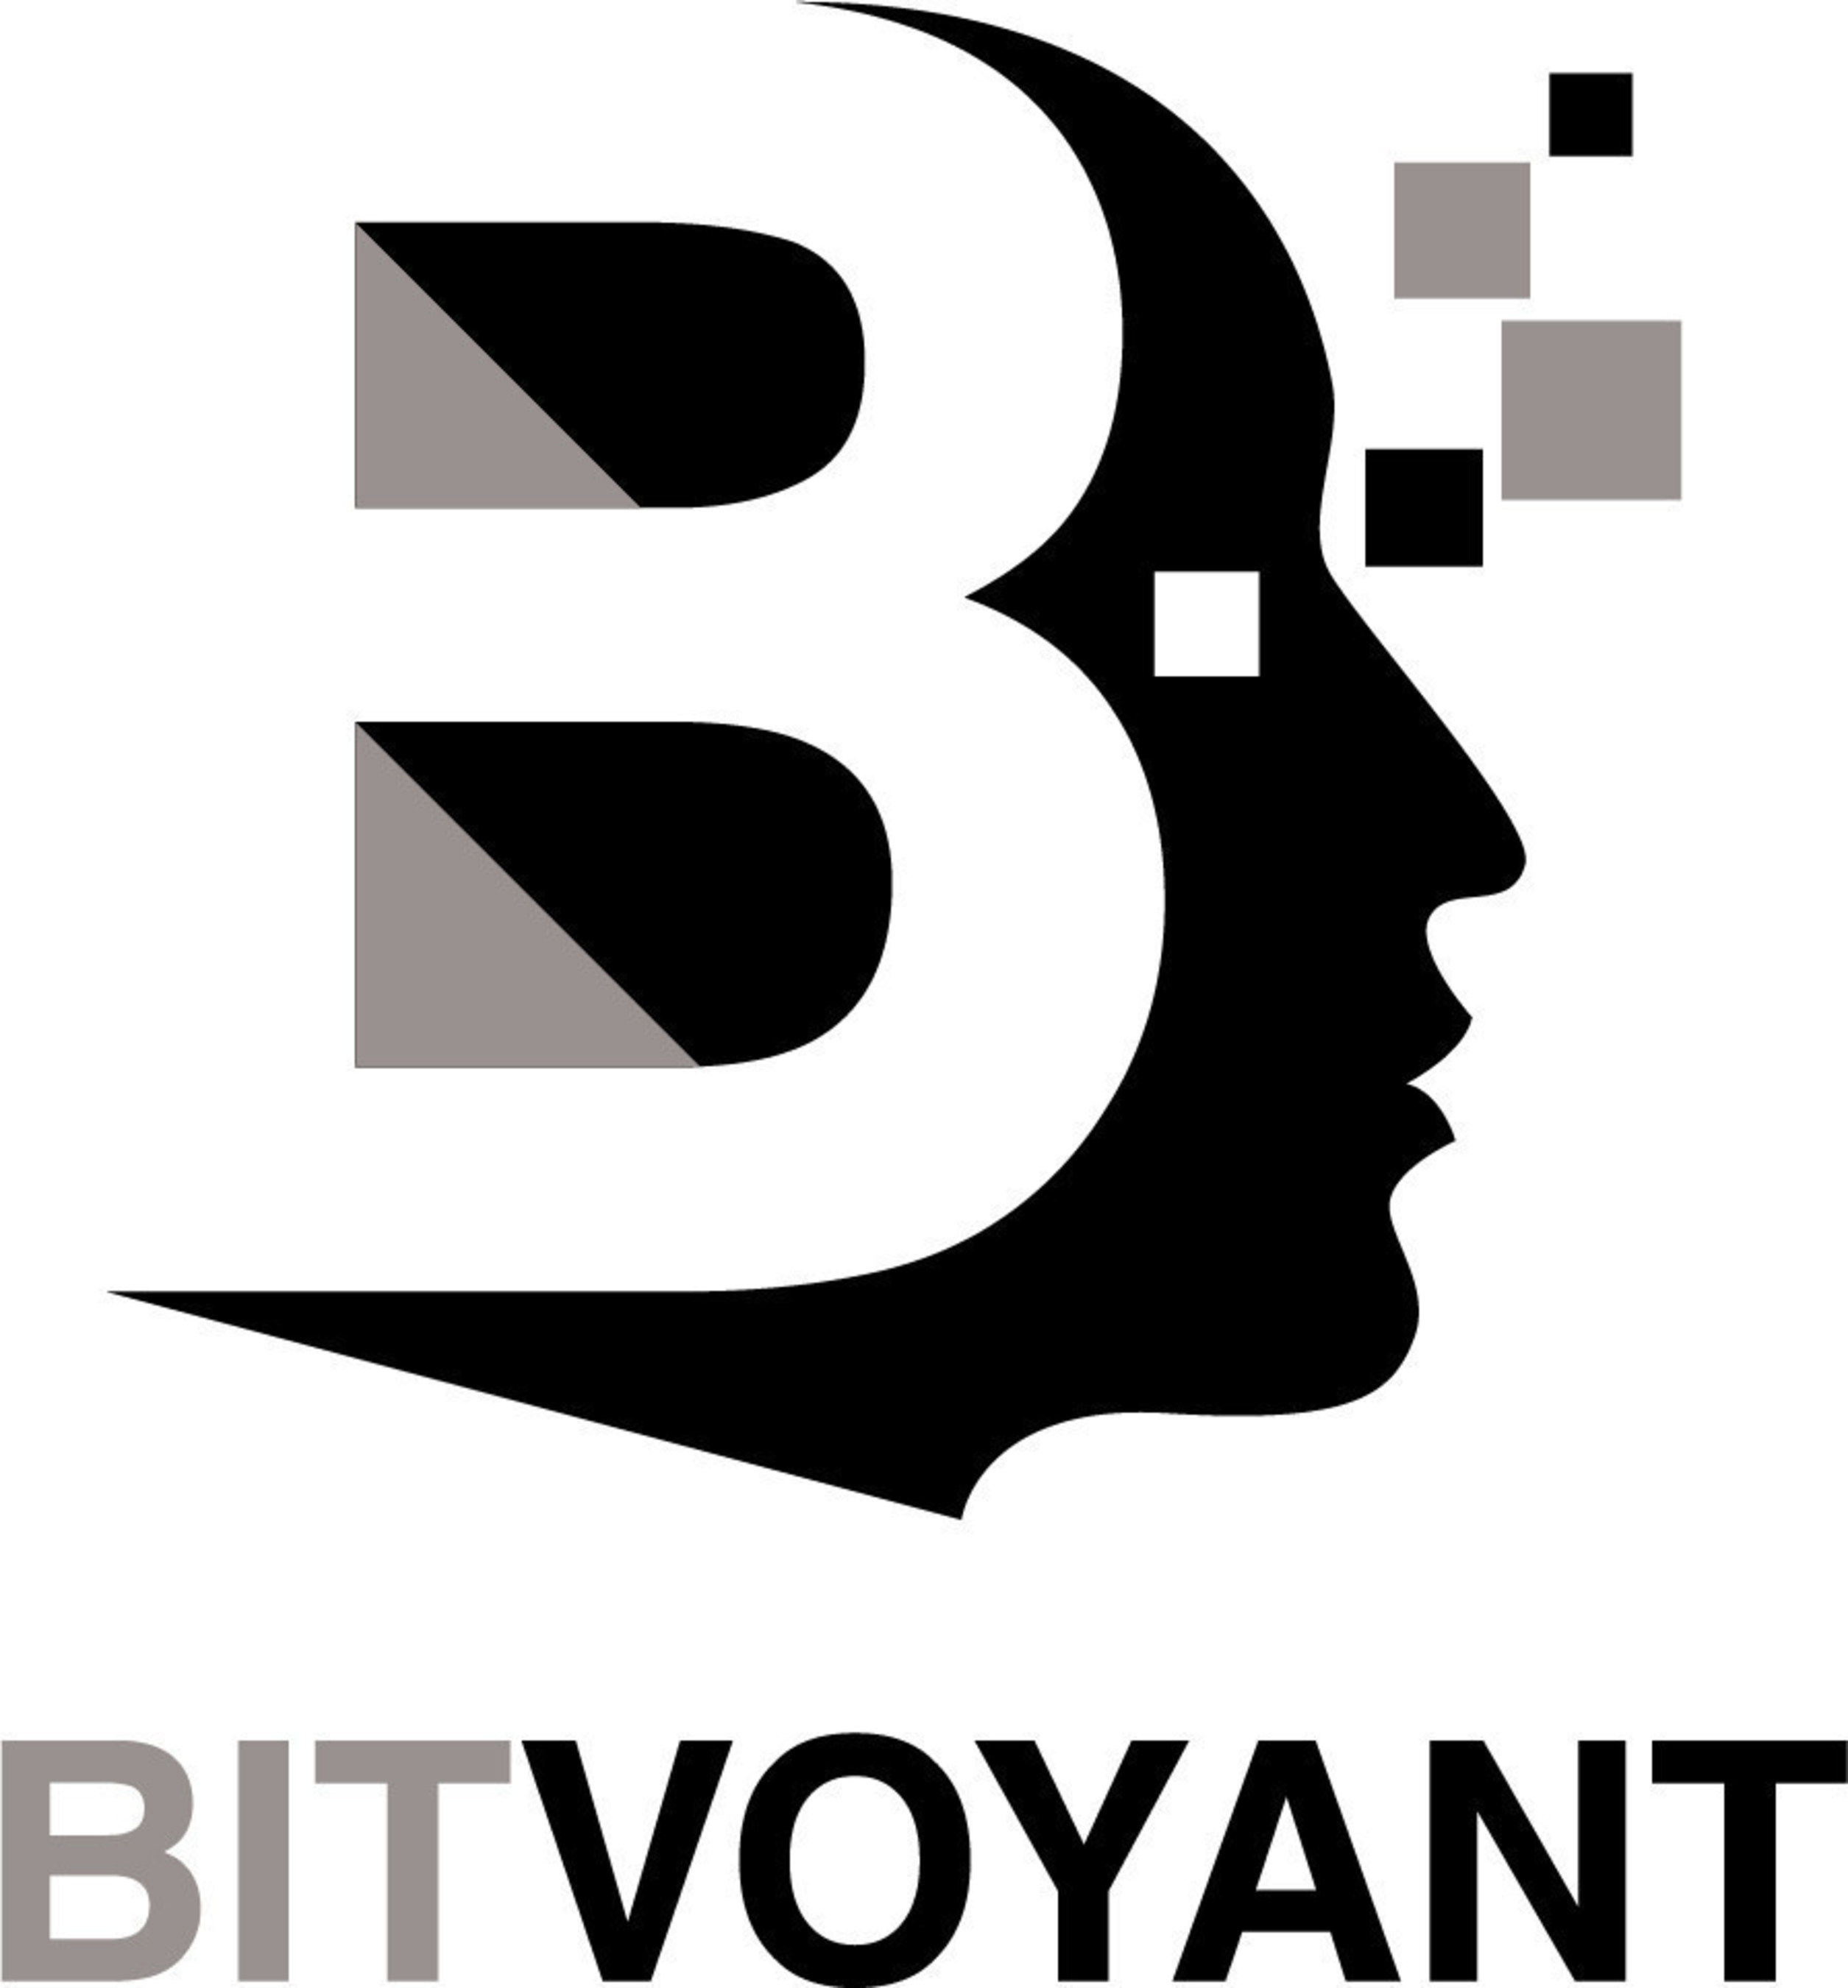 BitVoyant is a provider of cyber-derived intelligence and proactive defense solutions